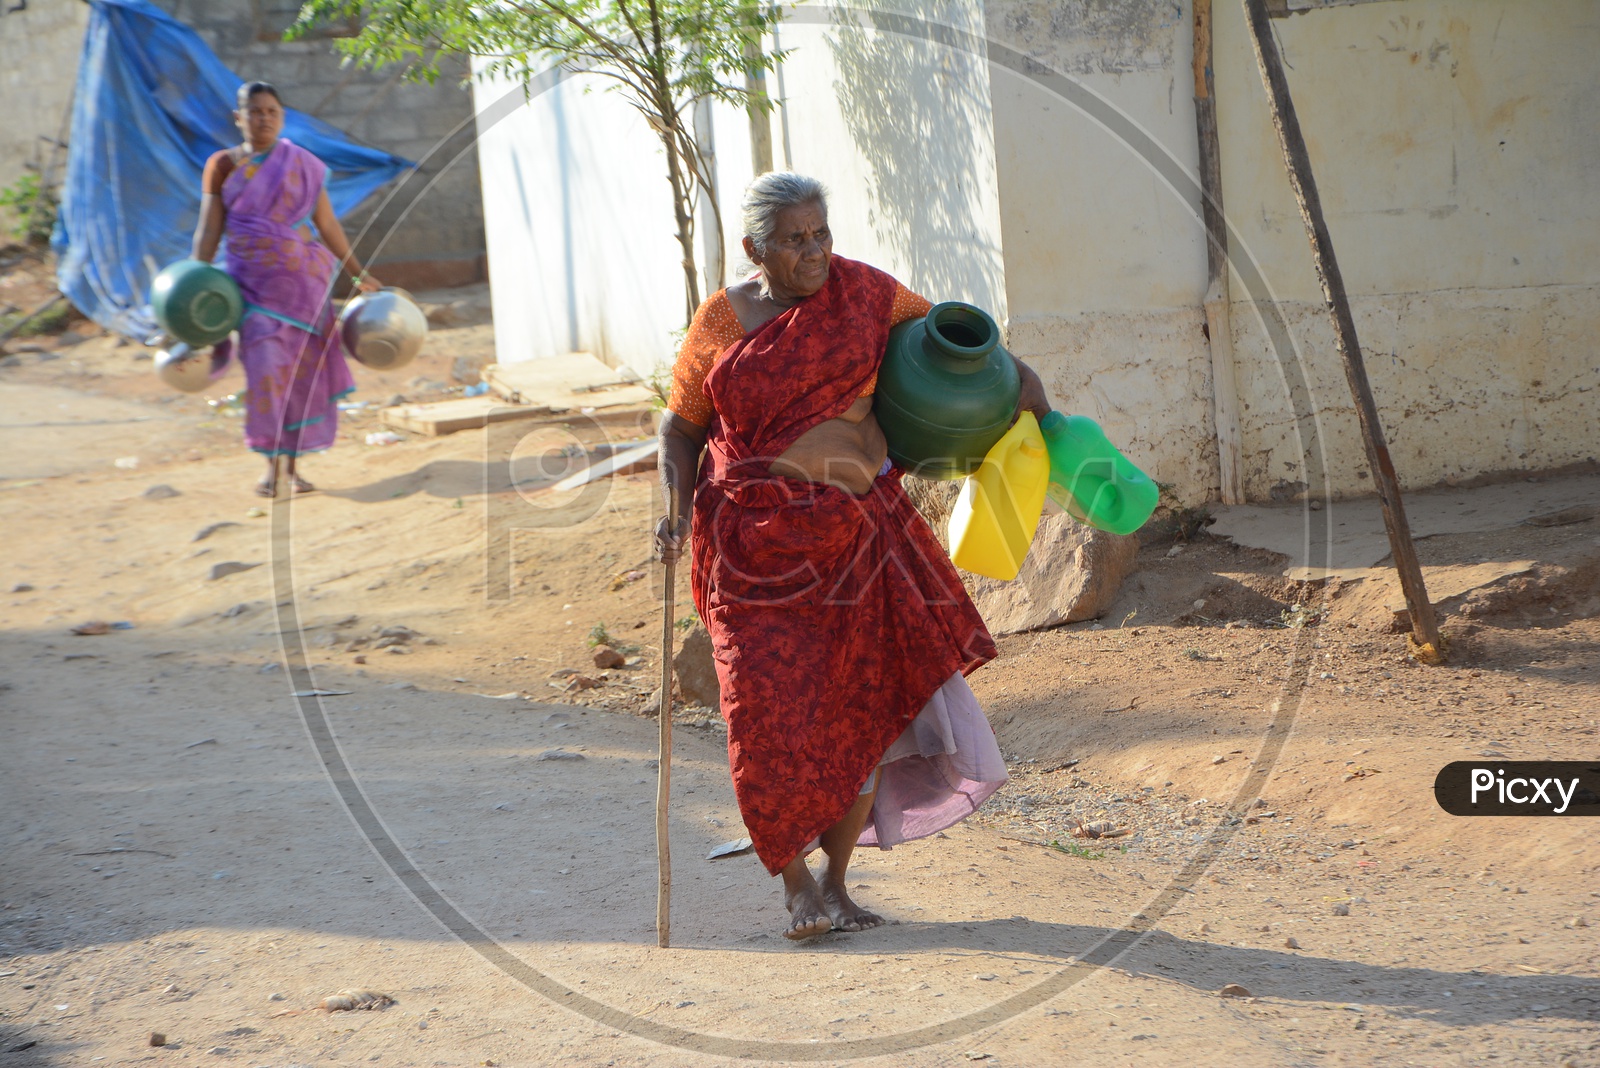 An Old Woman Carrying drinking water in Plastic Vessels At Water Crisis Areas Of Hyderabad